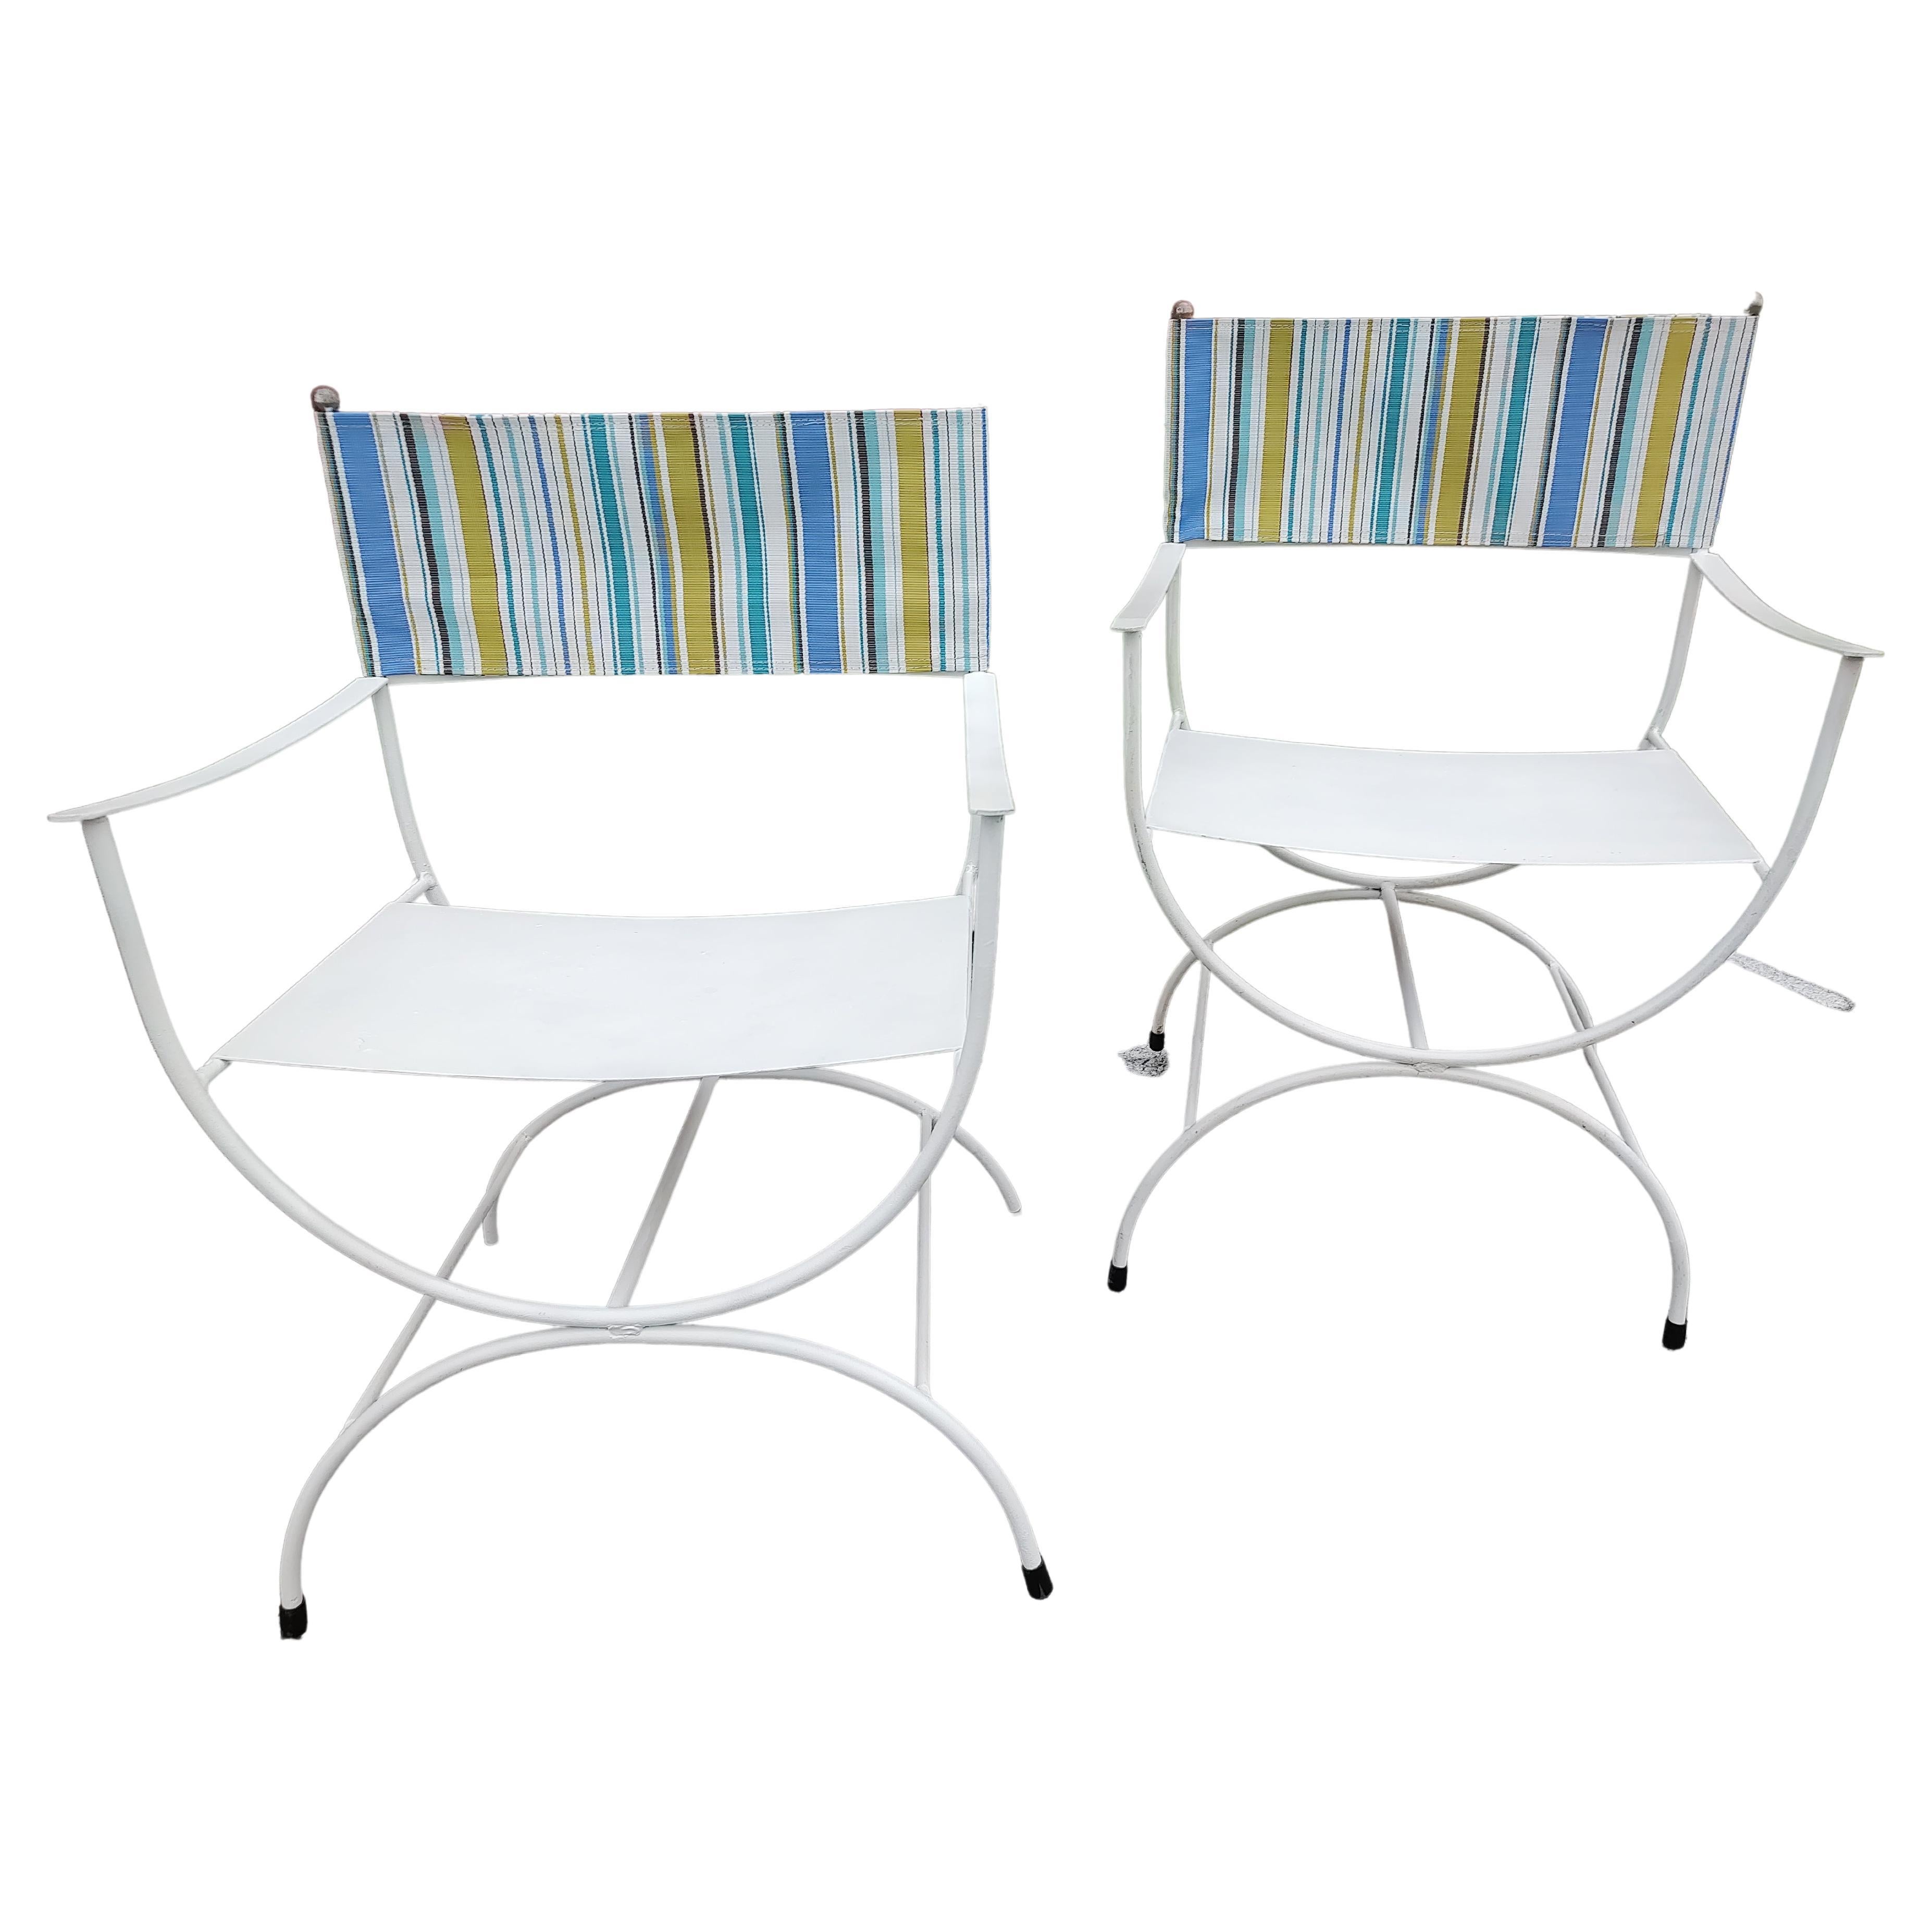 Pair of Mid Century Modern Patio Directors Chairs with Sunbrella Backs 1960 For Sale